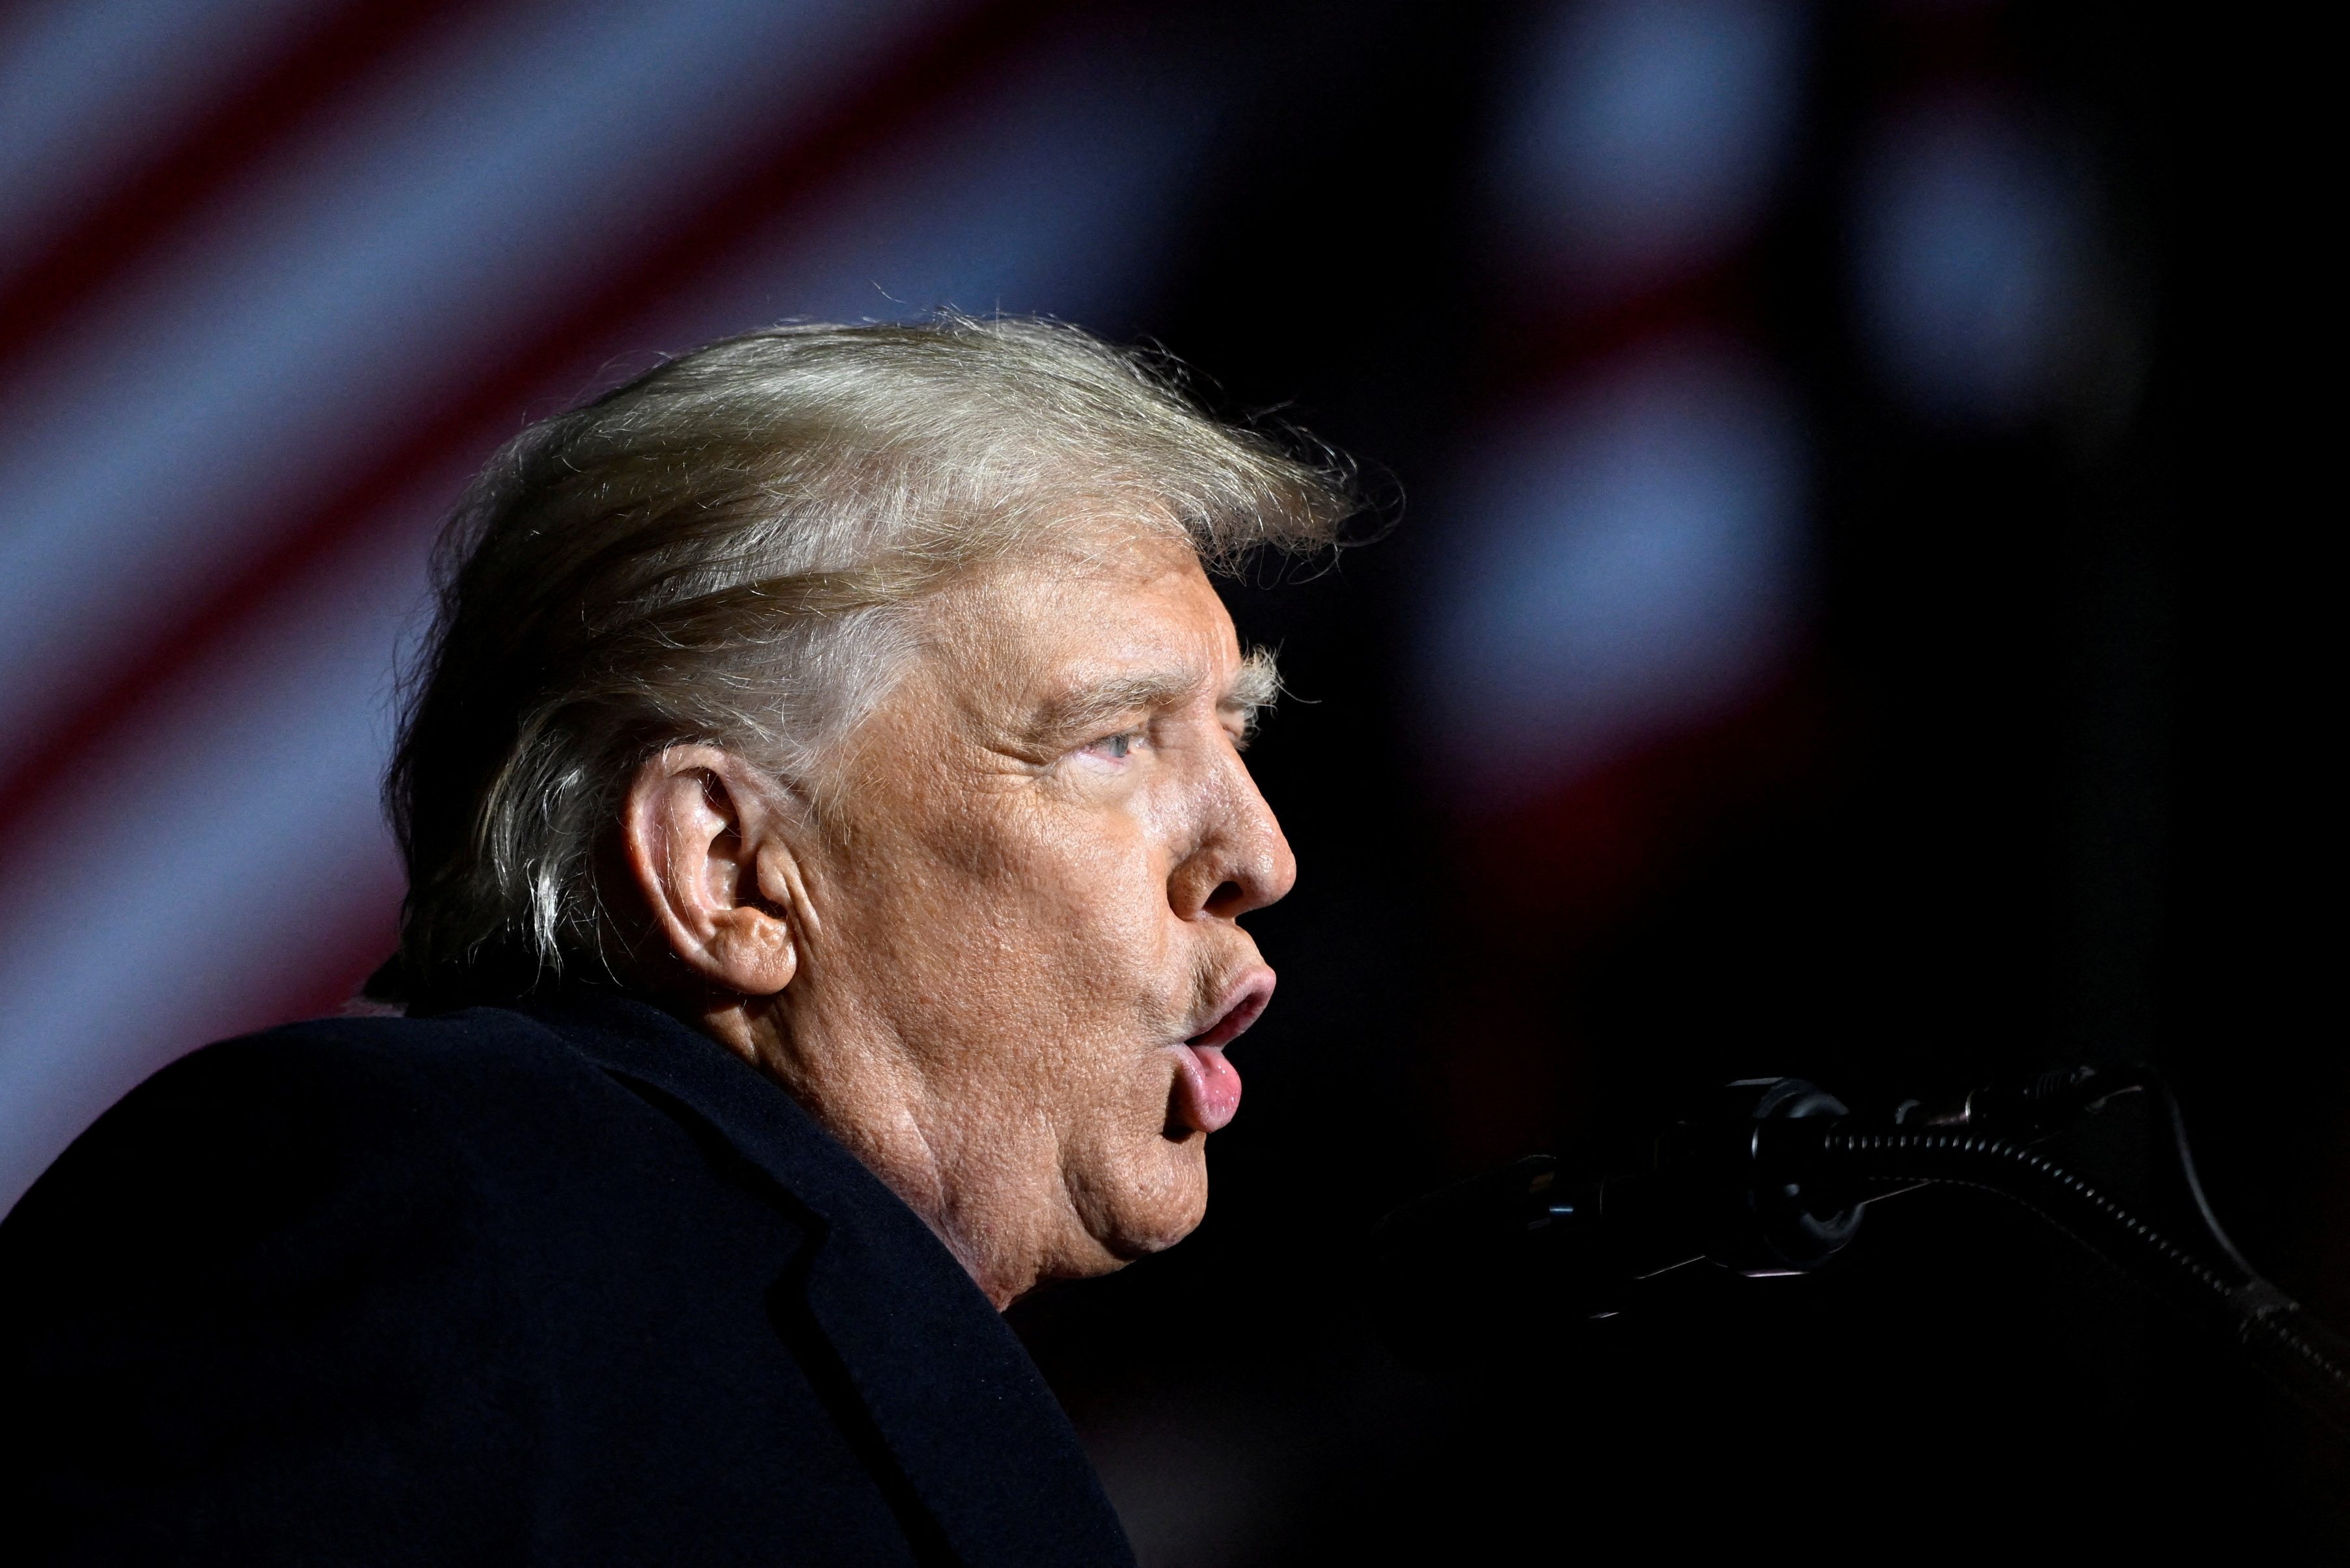 What has Donald Trump said about the Midterm results?